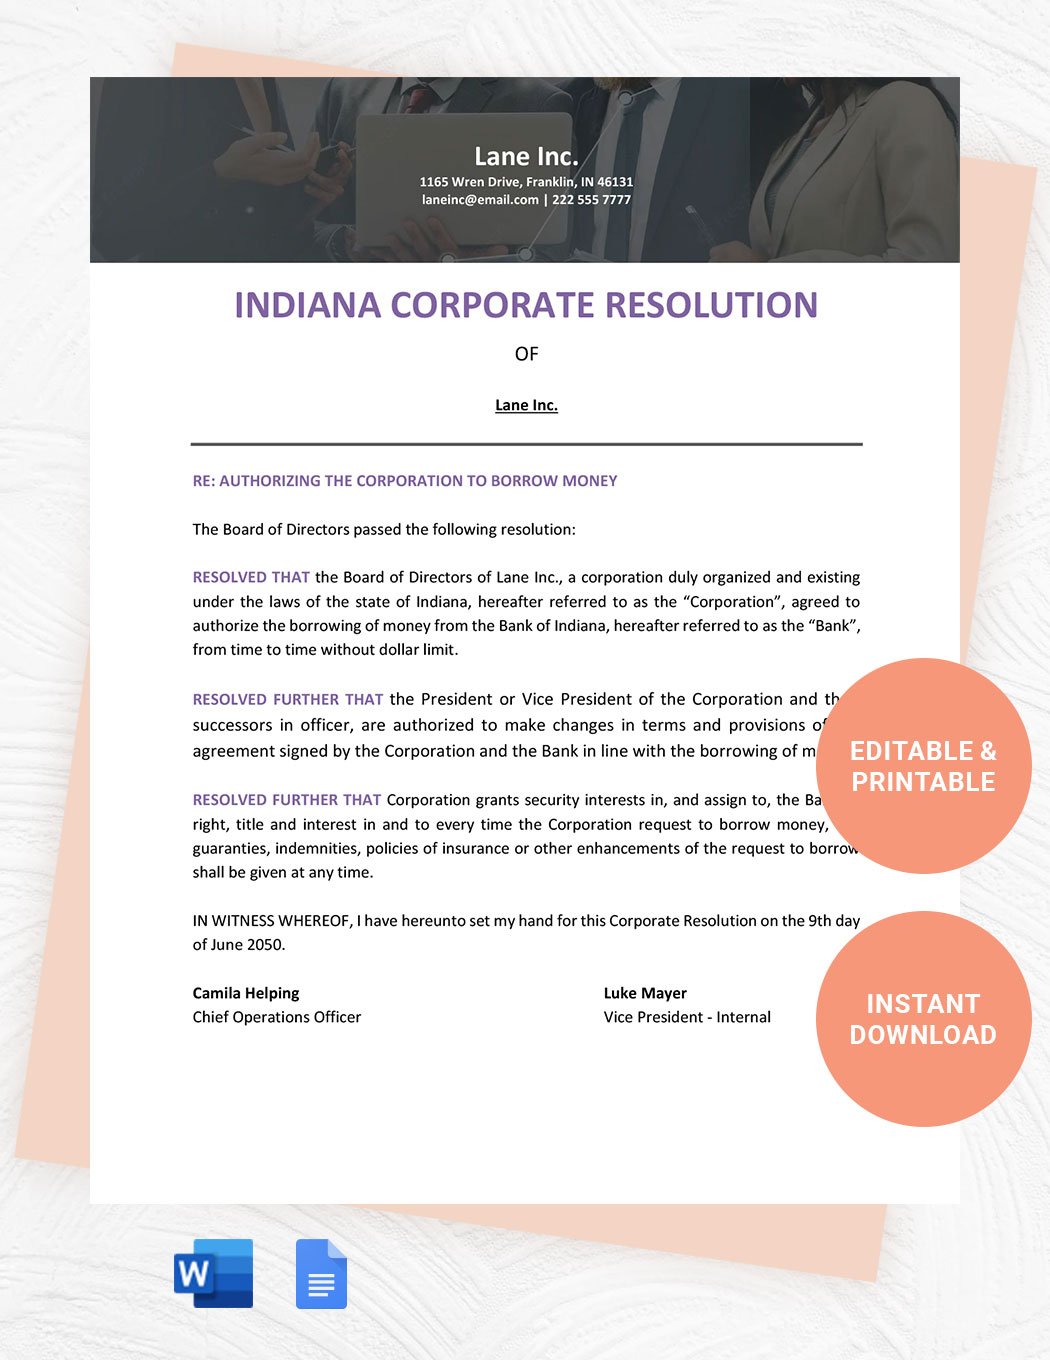 Indiana Corporate Resolution Template